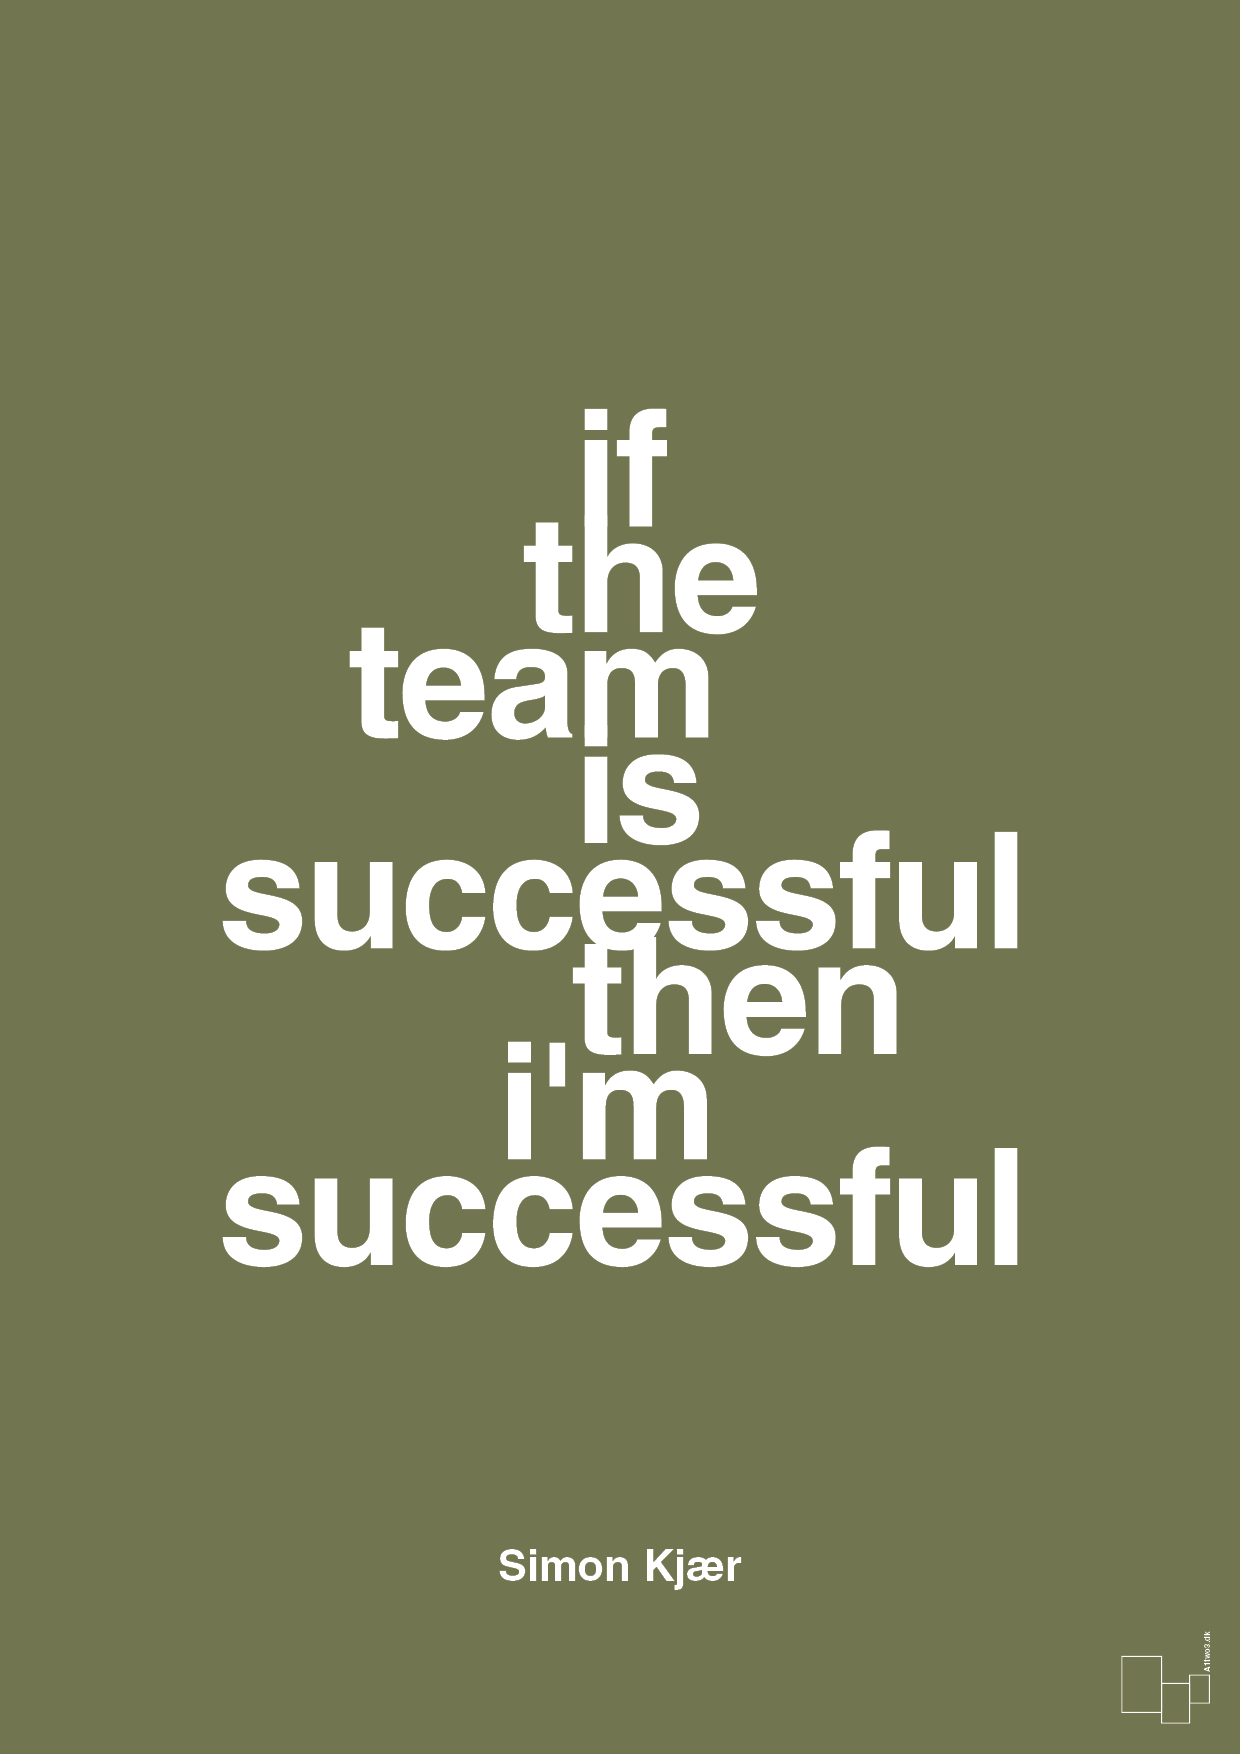 if the team is successful then i'm successful - Plakat med Citater i Secret Meadow